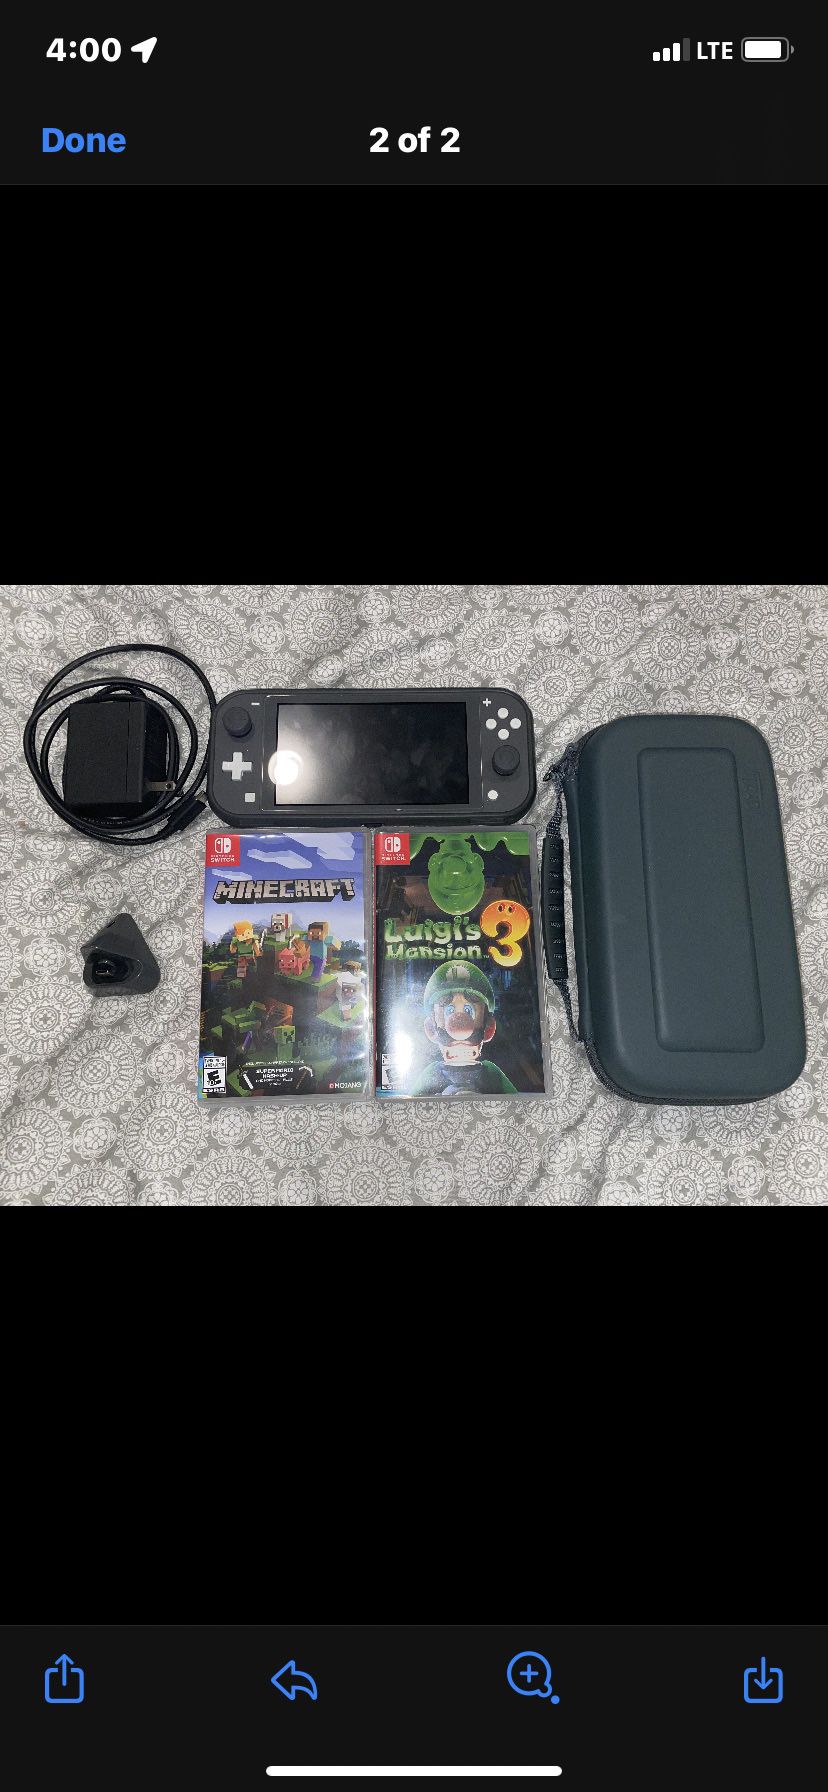 NITENDO SWITCH WITH CASE AND 2 GAMES